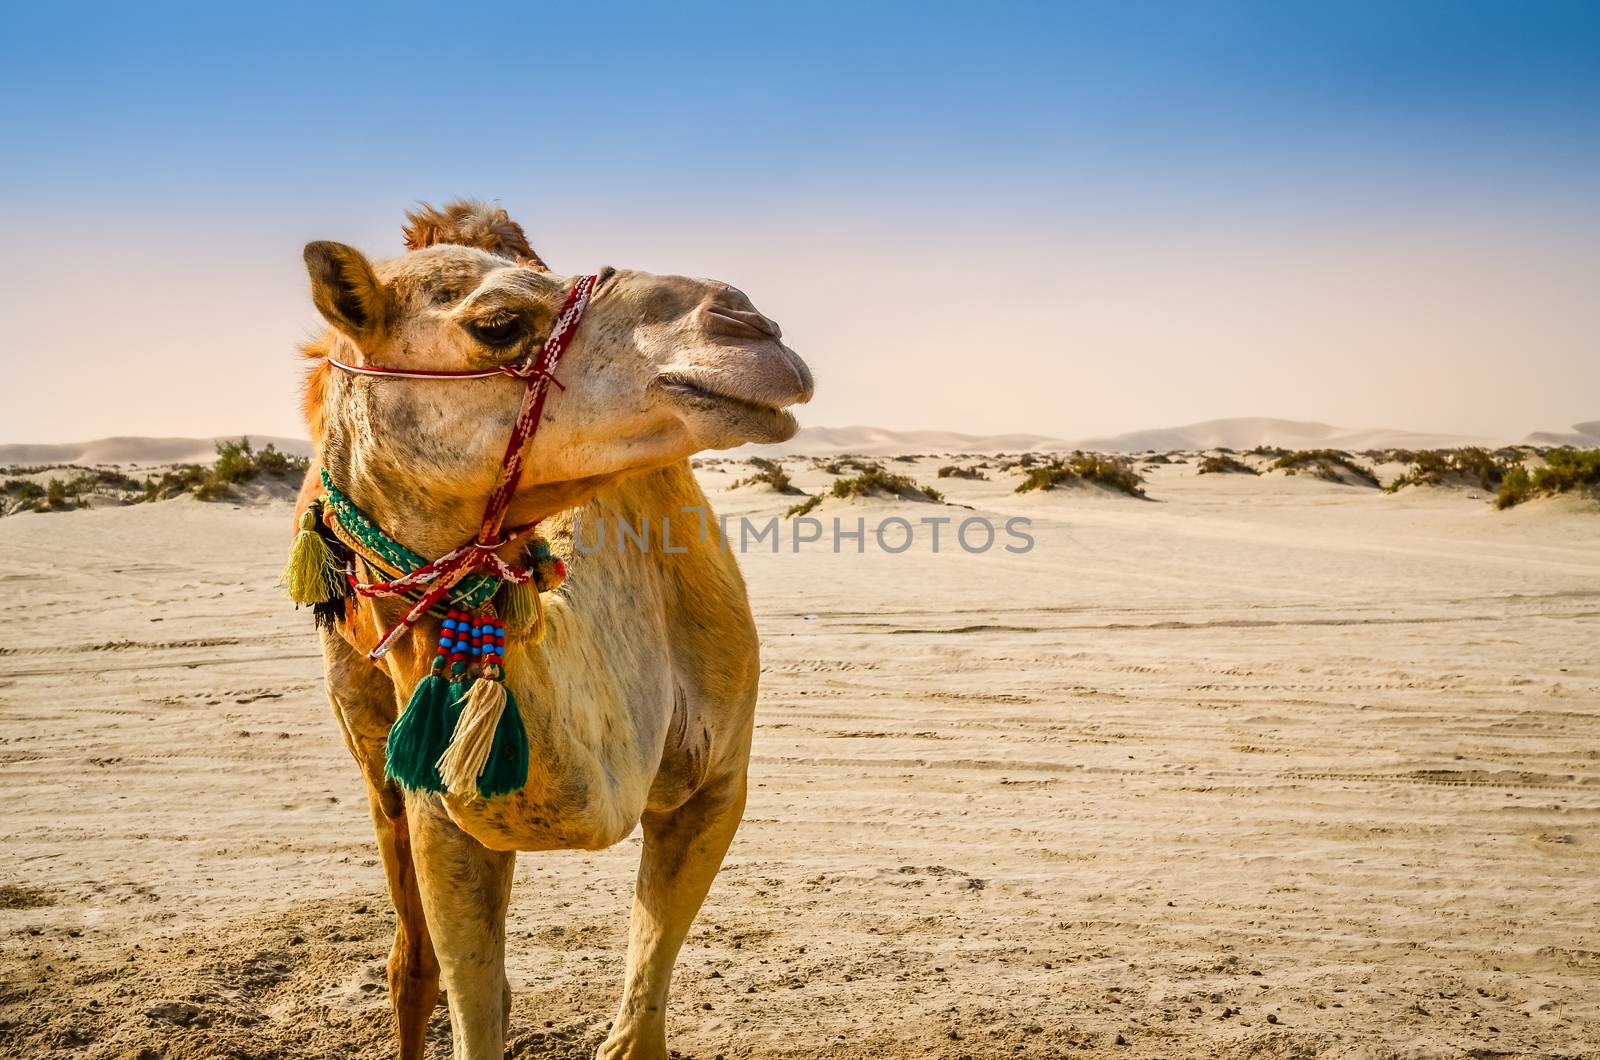 Camel standing in the desert looking away by martinm303